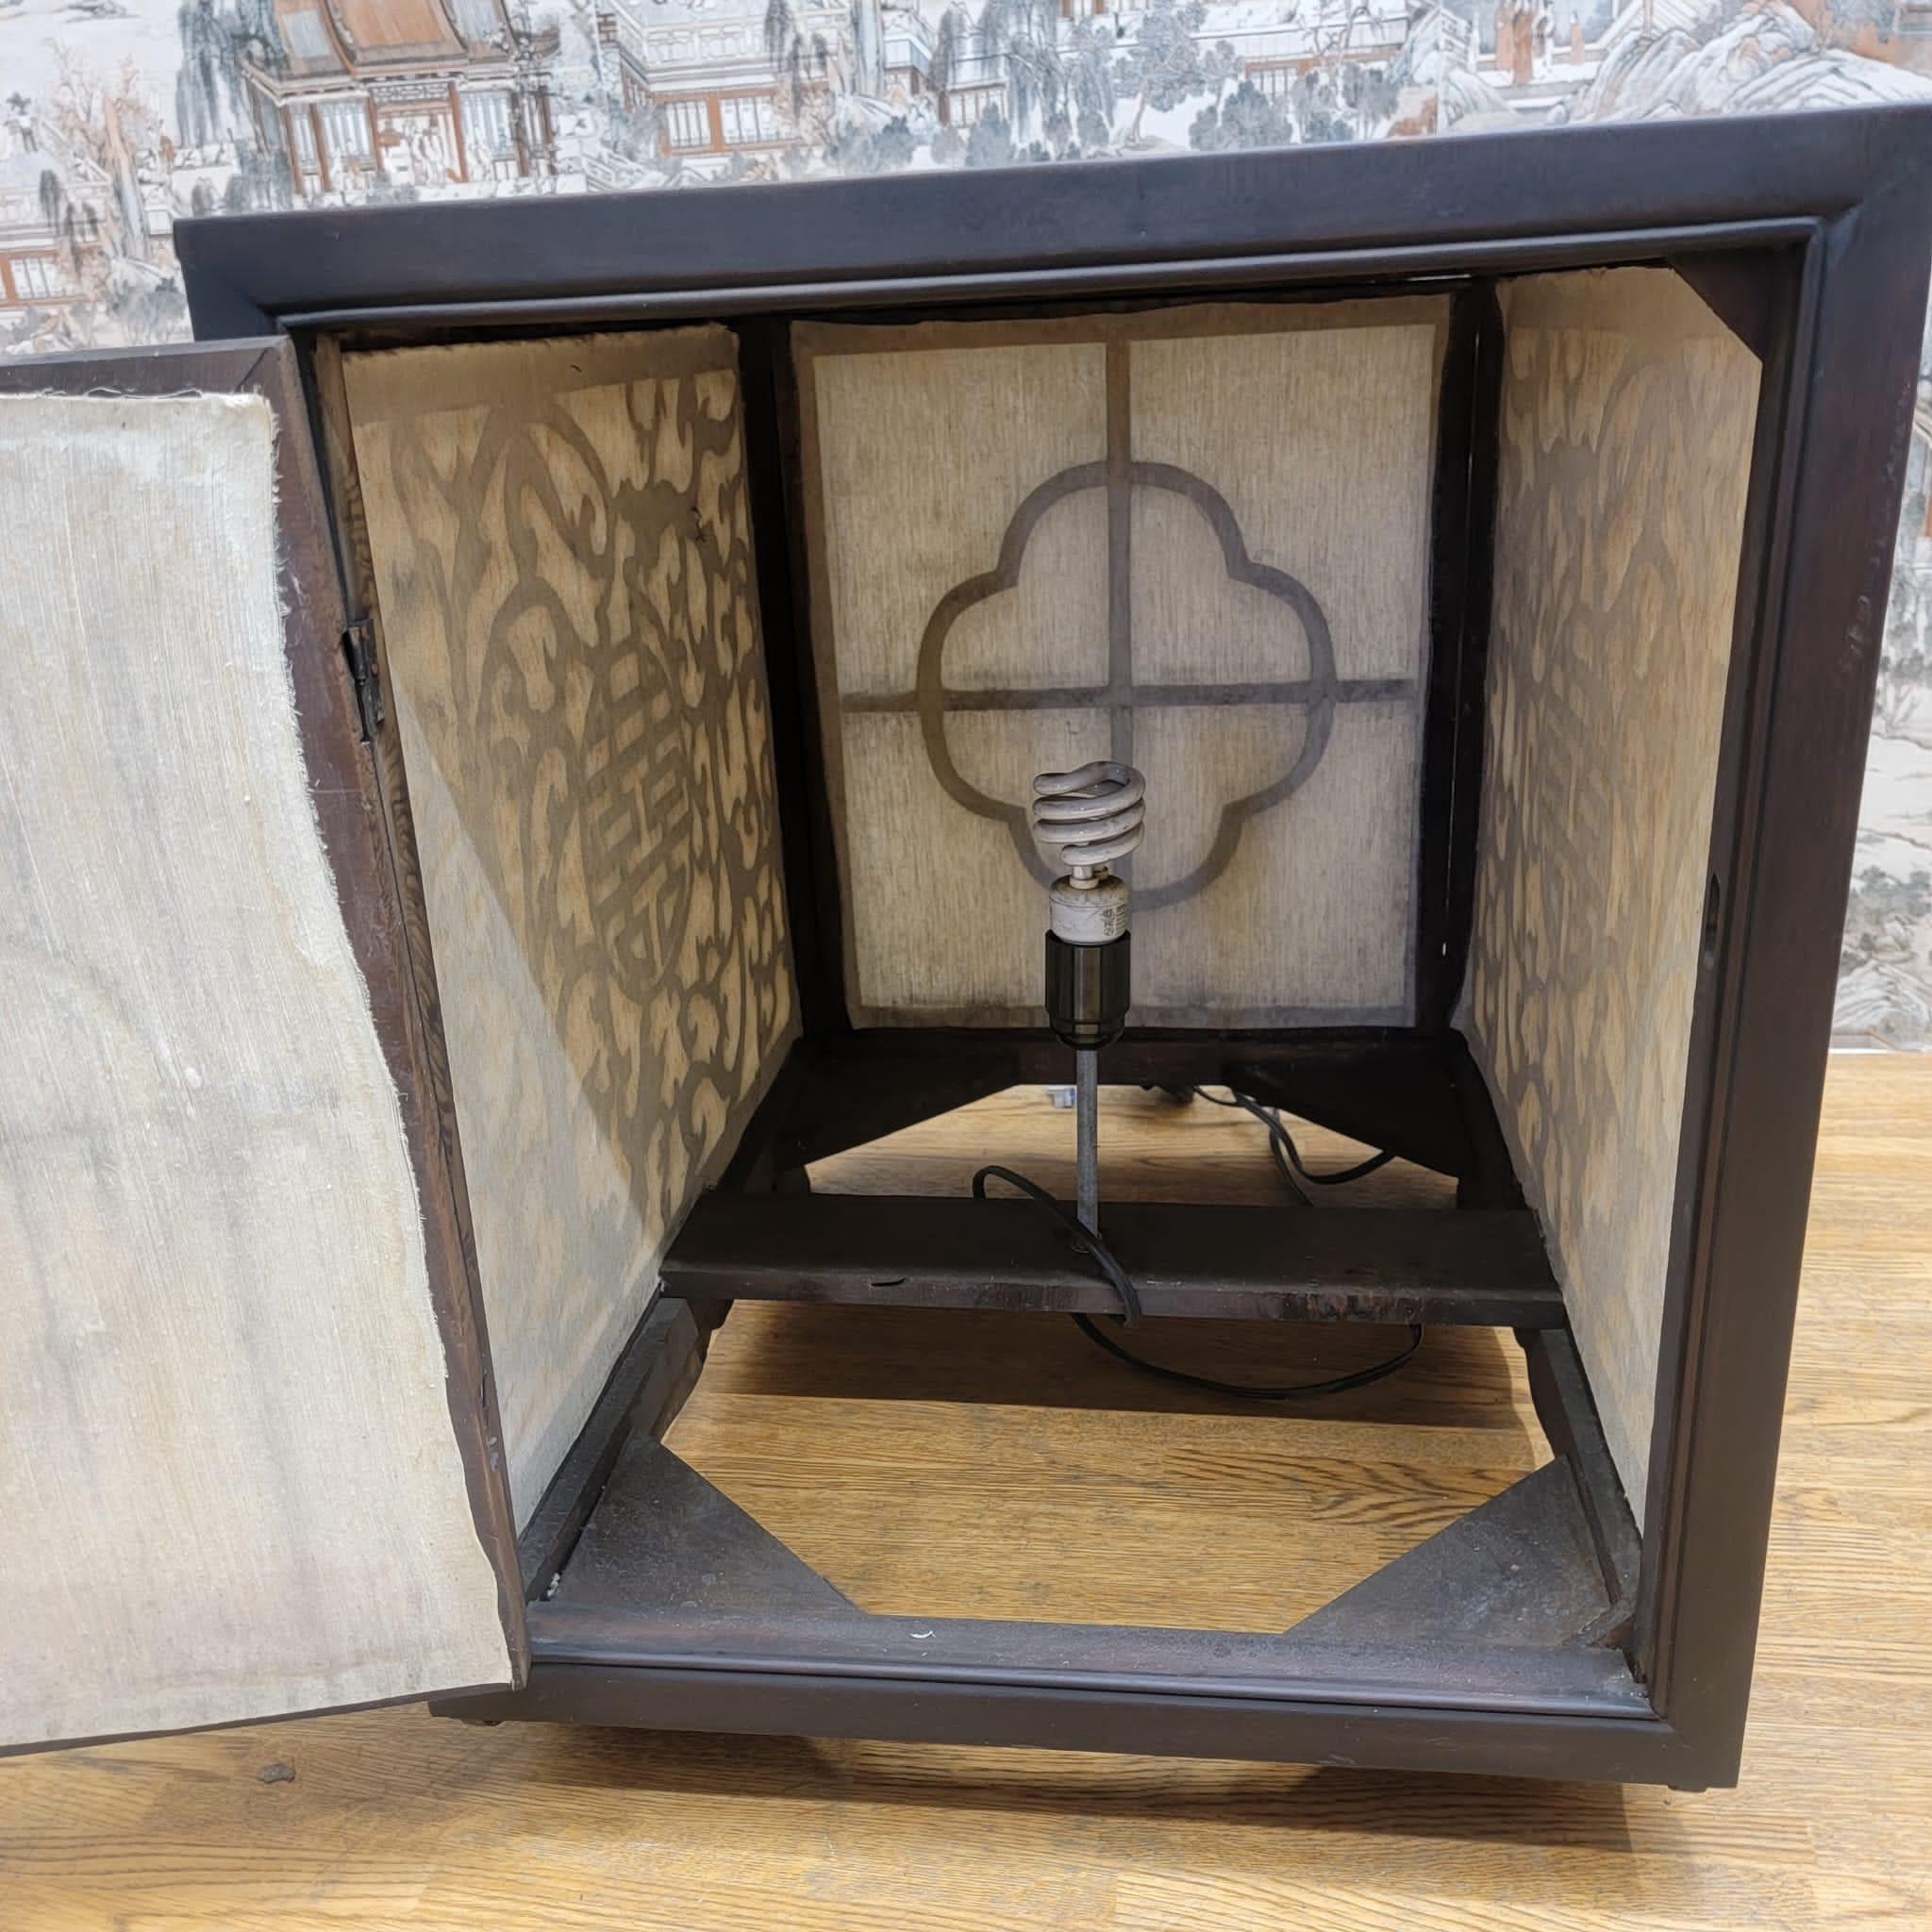 Vintage Chinese Carved Decorative Elm Side Tables with Light

These vintage chinese carved elm side tables have a removal panel to replace the light. Both tables are in working condition and have been tested. These side tables have their original